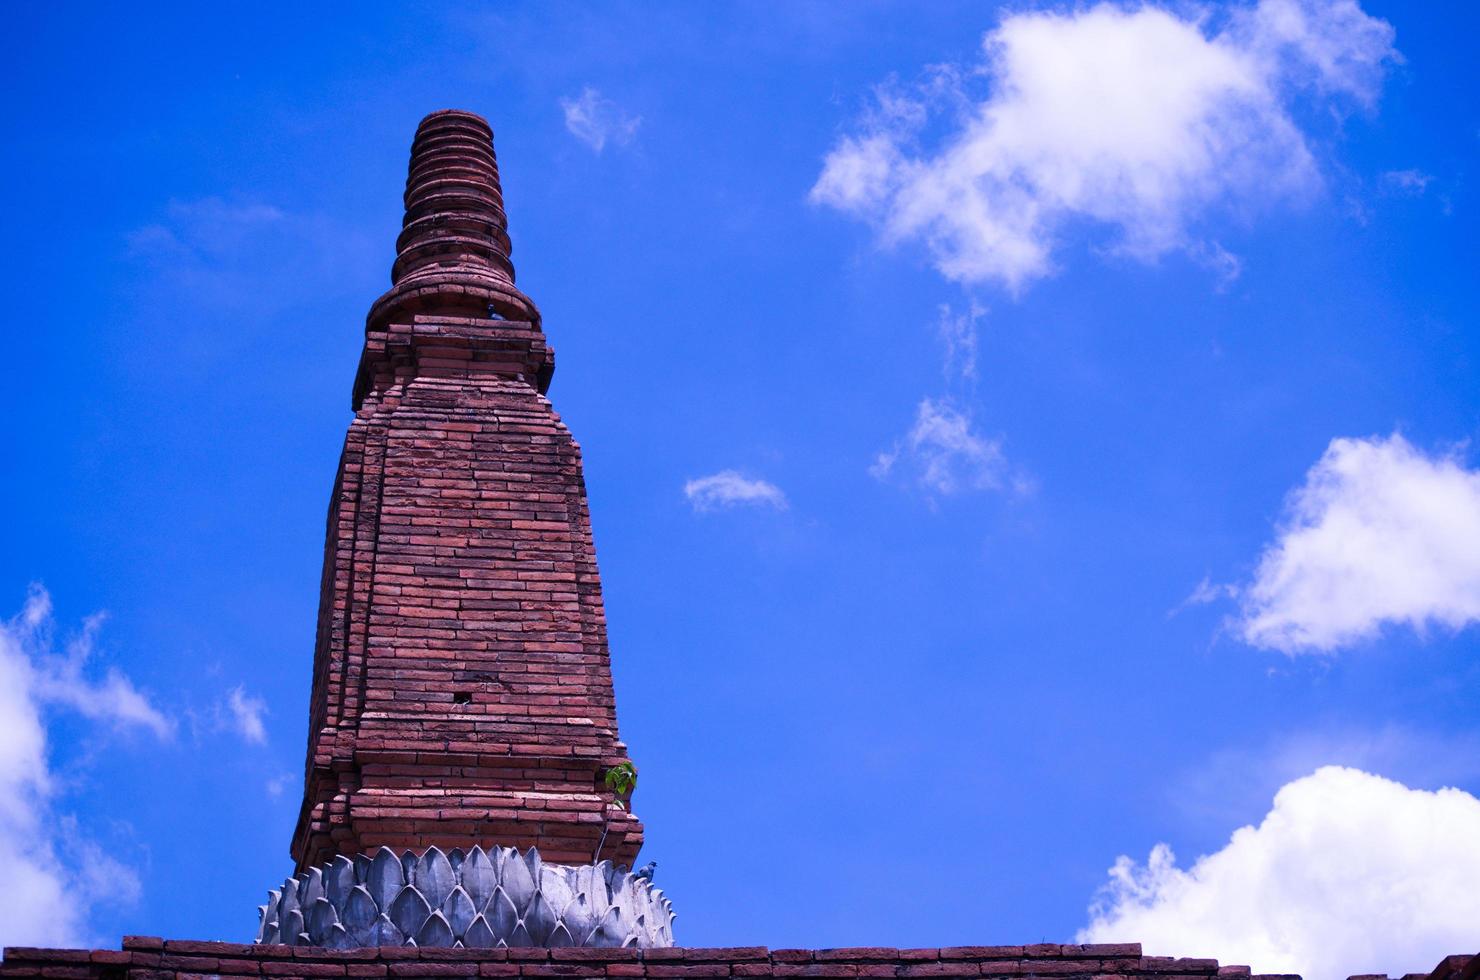 The top of the pagoda is made of old bricks. photo